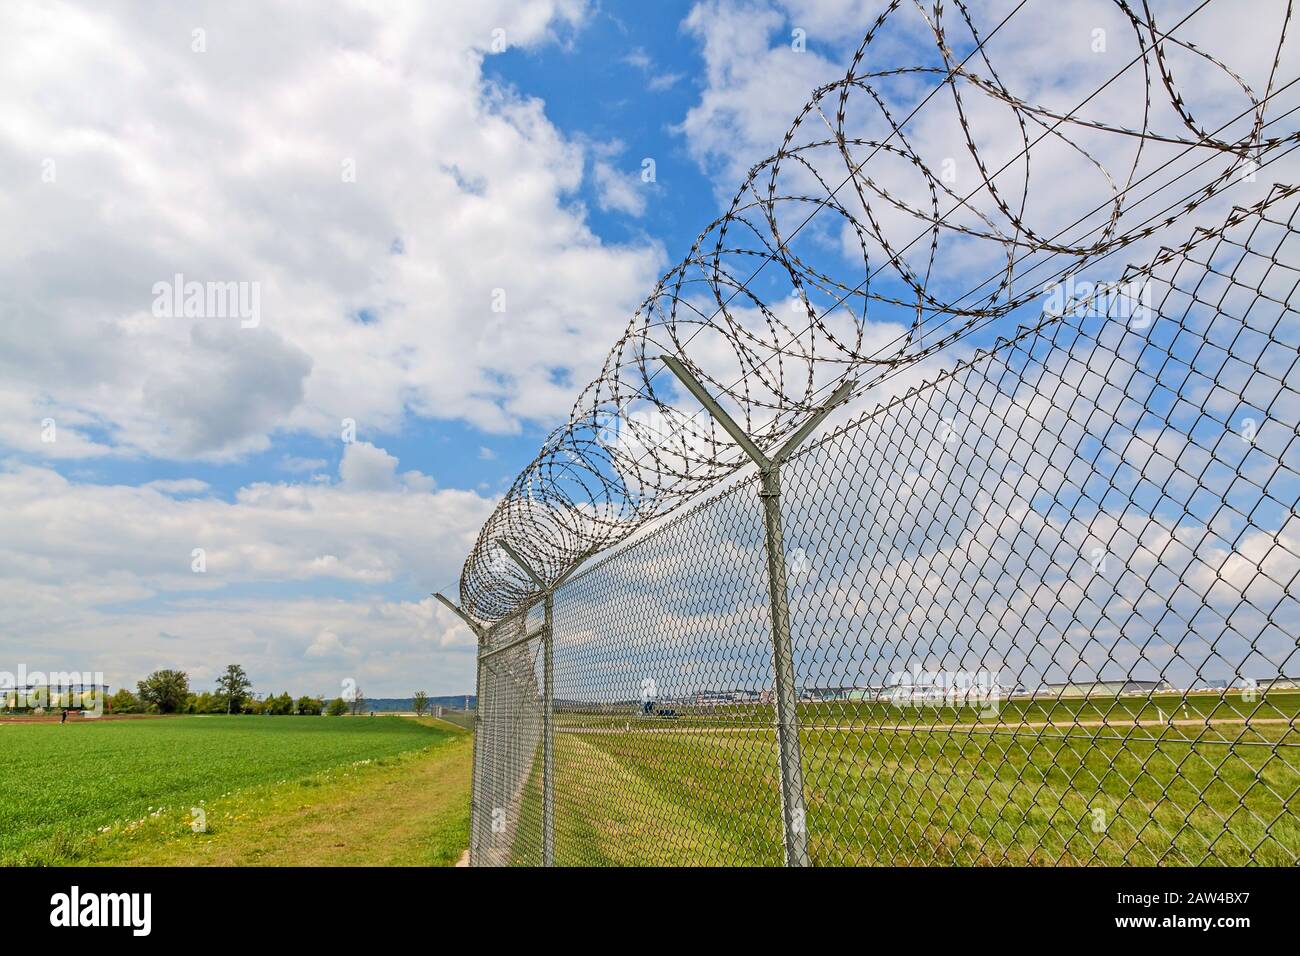 fence with barbed wire, green landscape and blue sky with clouds Stock Photo